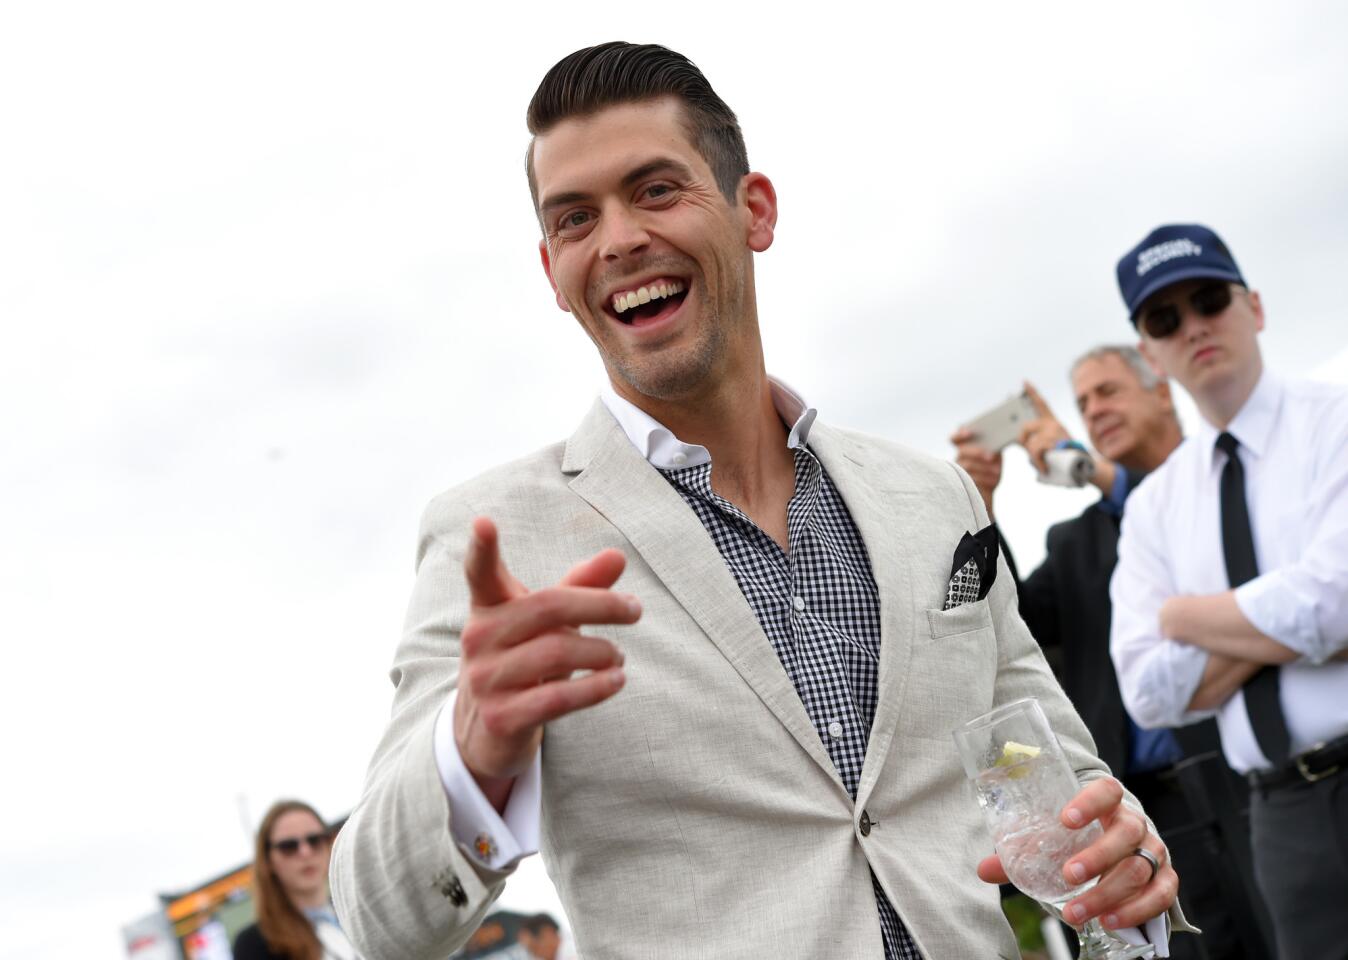 Ravens kicker Justin Tucker in Preakness Village on the day of the 142nd running of the Preakness Stake.